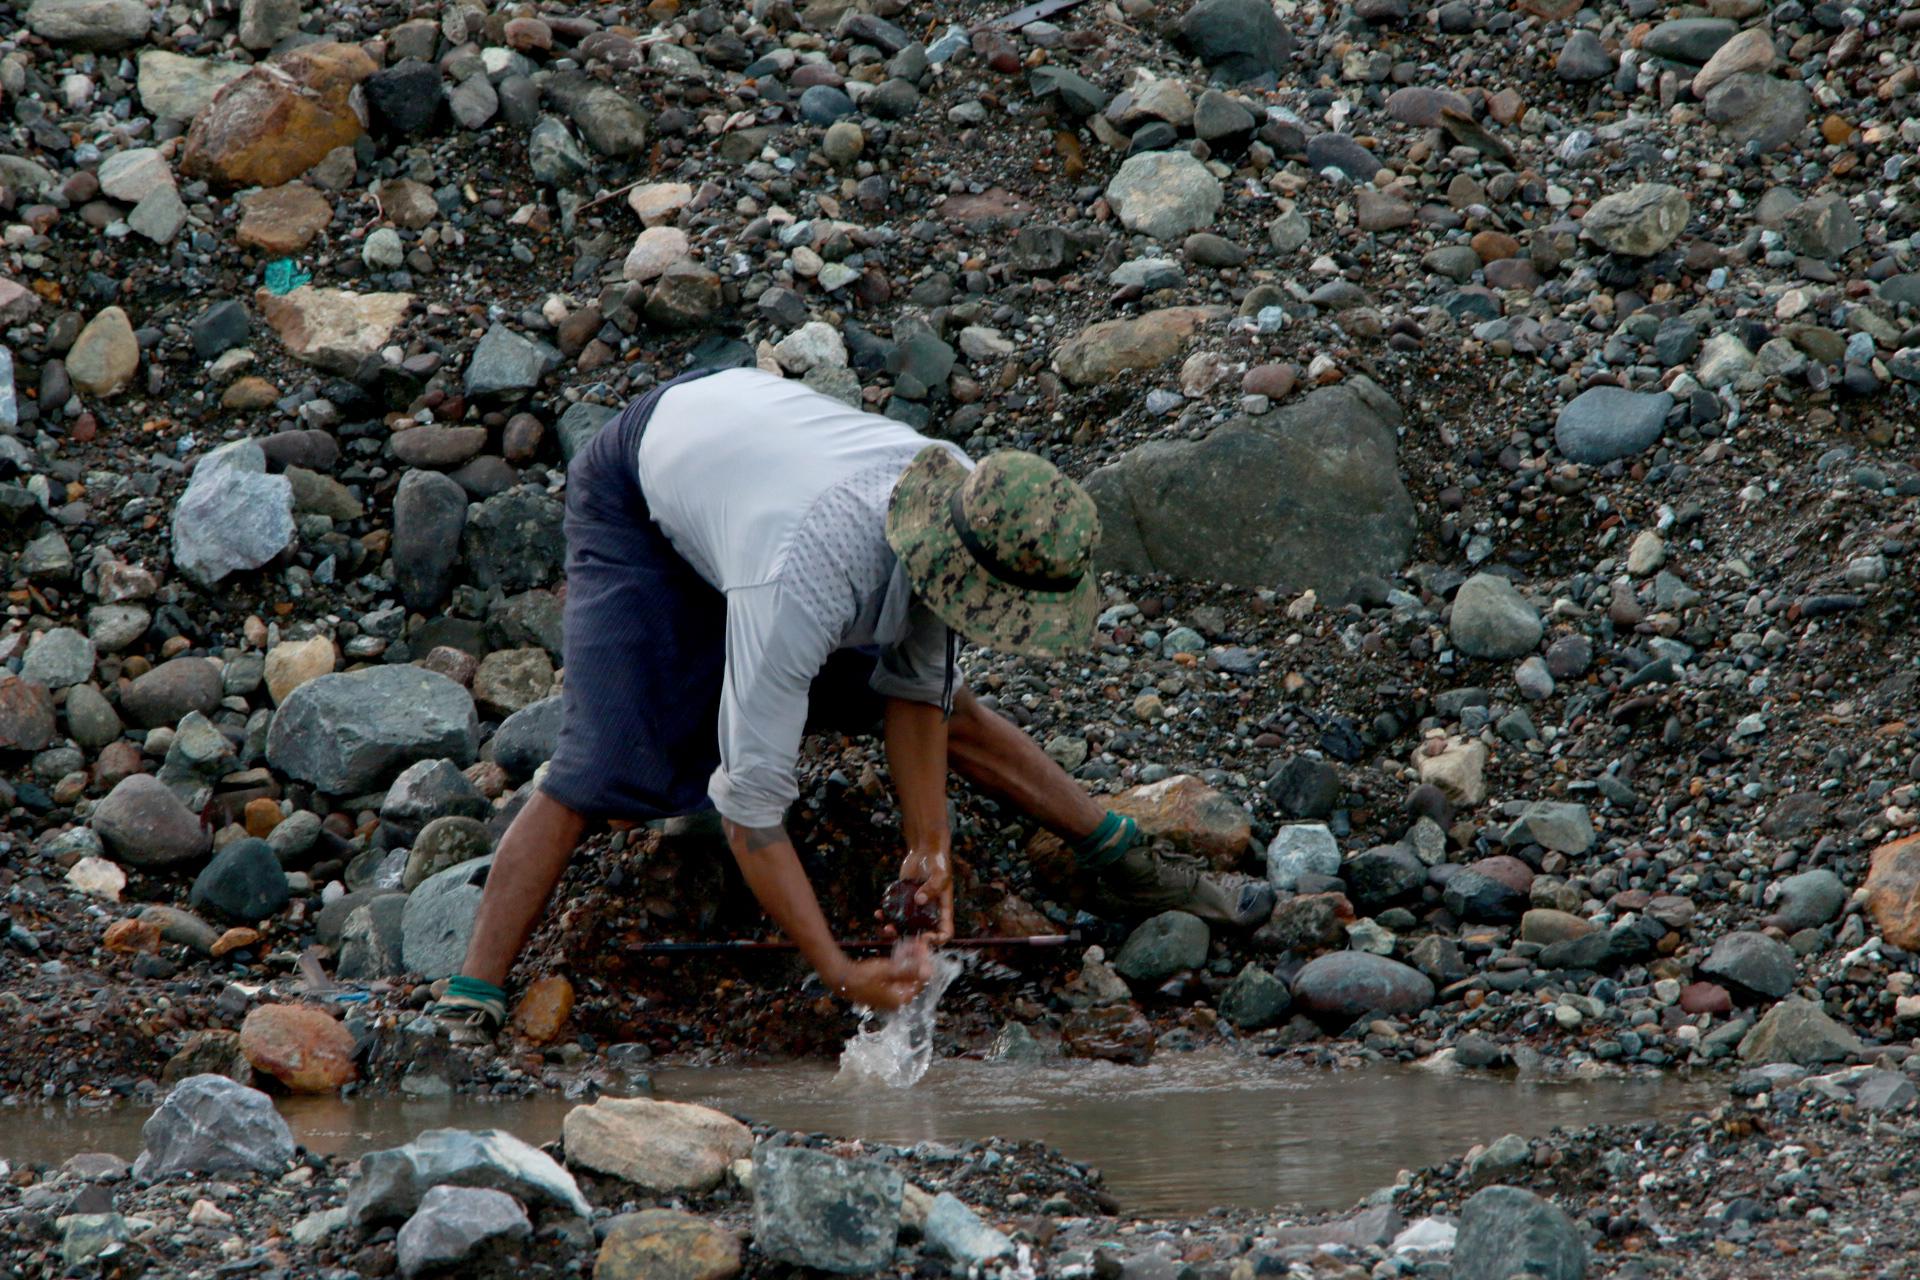 A miner searches for Jade stones at the HpaKant jade mining area, in Kachin State, northern Myanmar, in Hpakant, Kachin State, northern Myanmar, 04 July 2020. EFE-EPA FILE/AH JE
